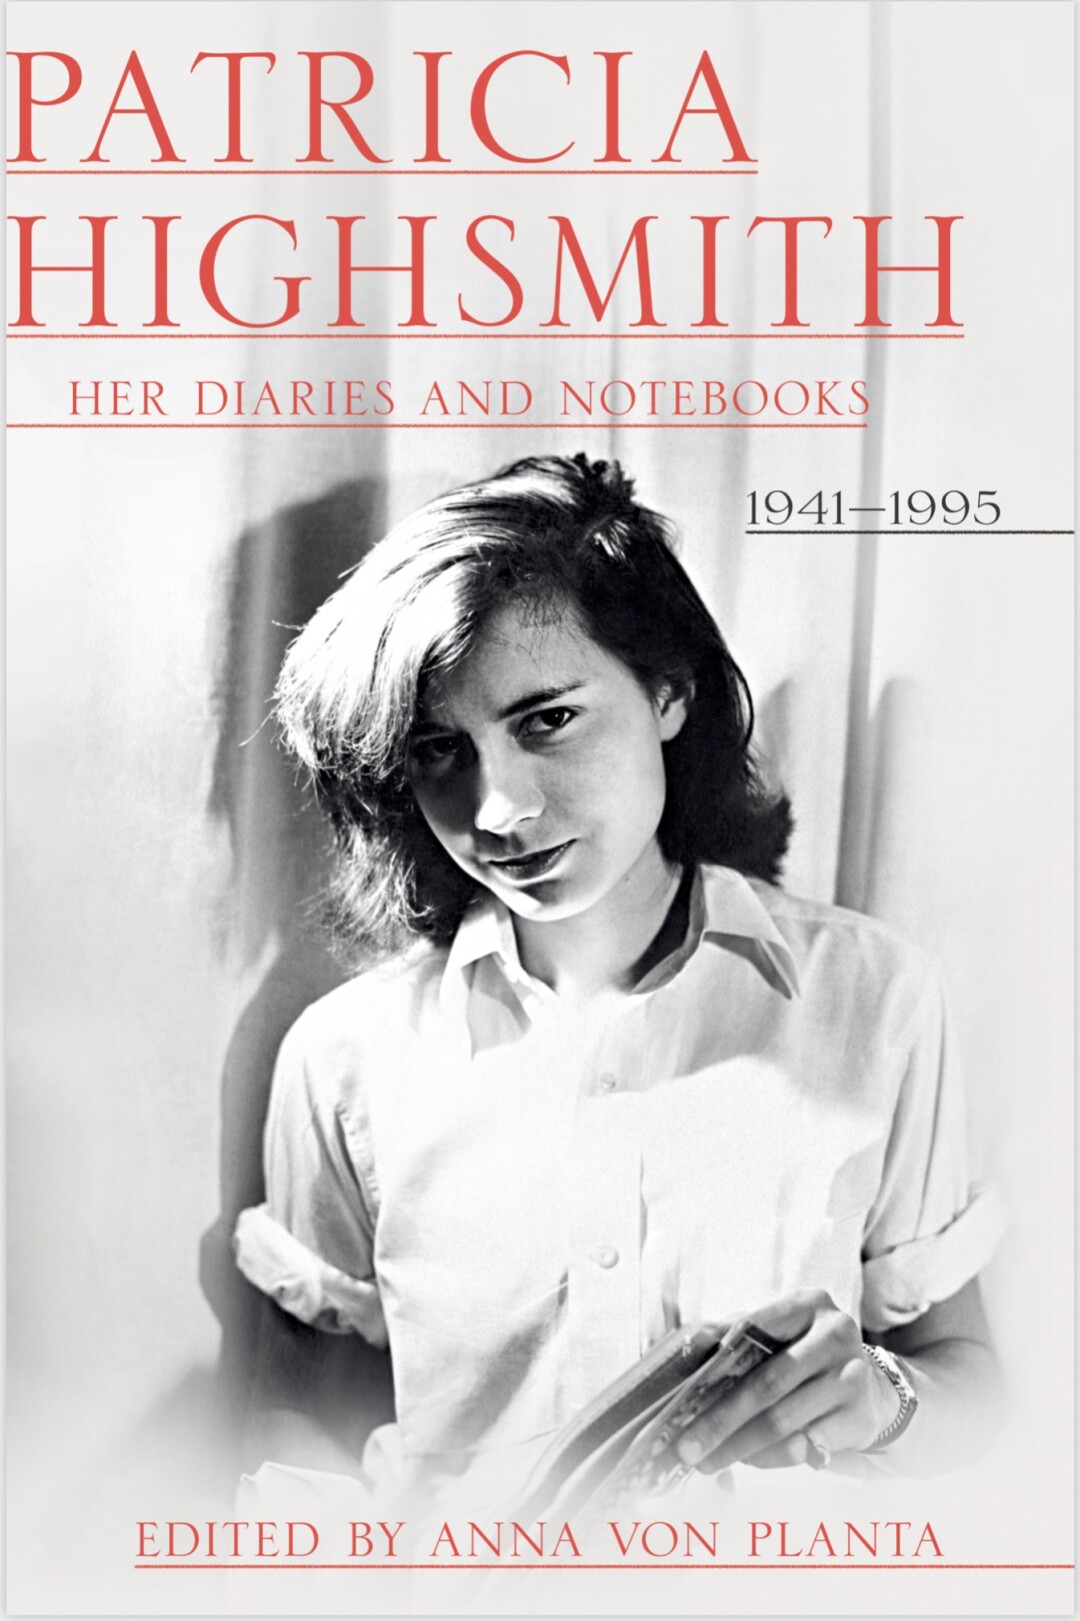 Book jacket for "Patricia Highsmith: Her Diaries and Notebooks: 1941-1995".